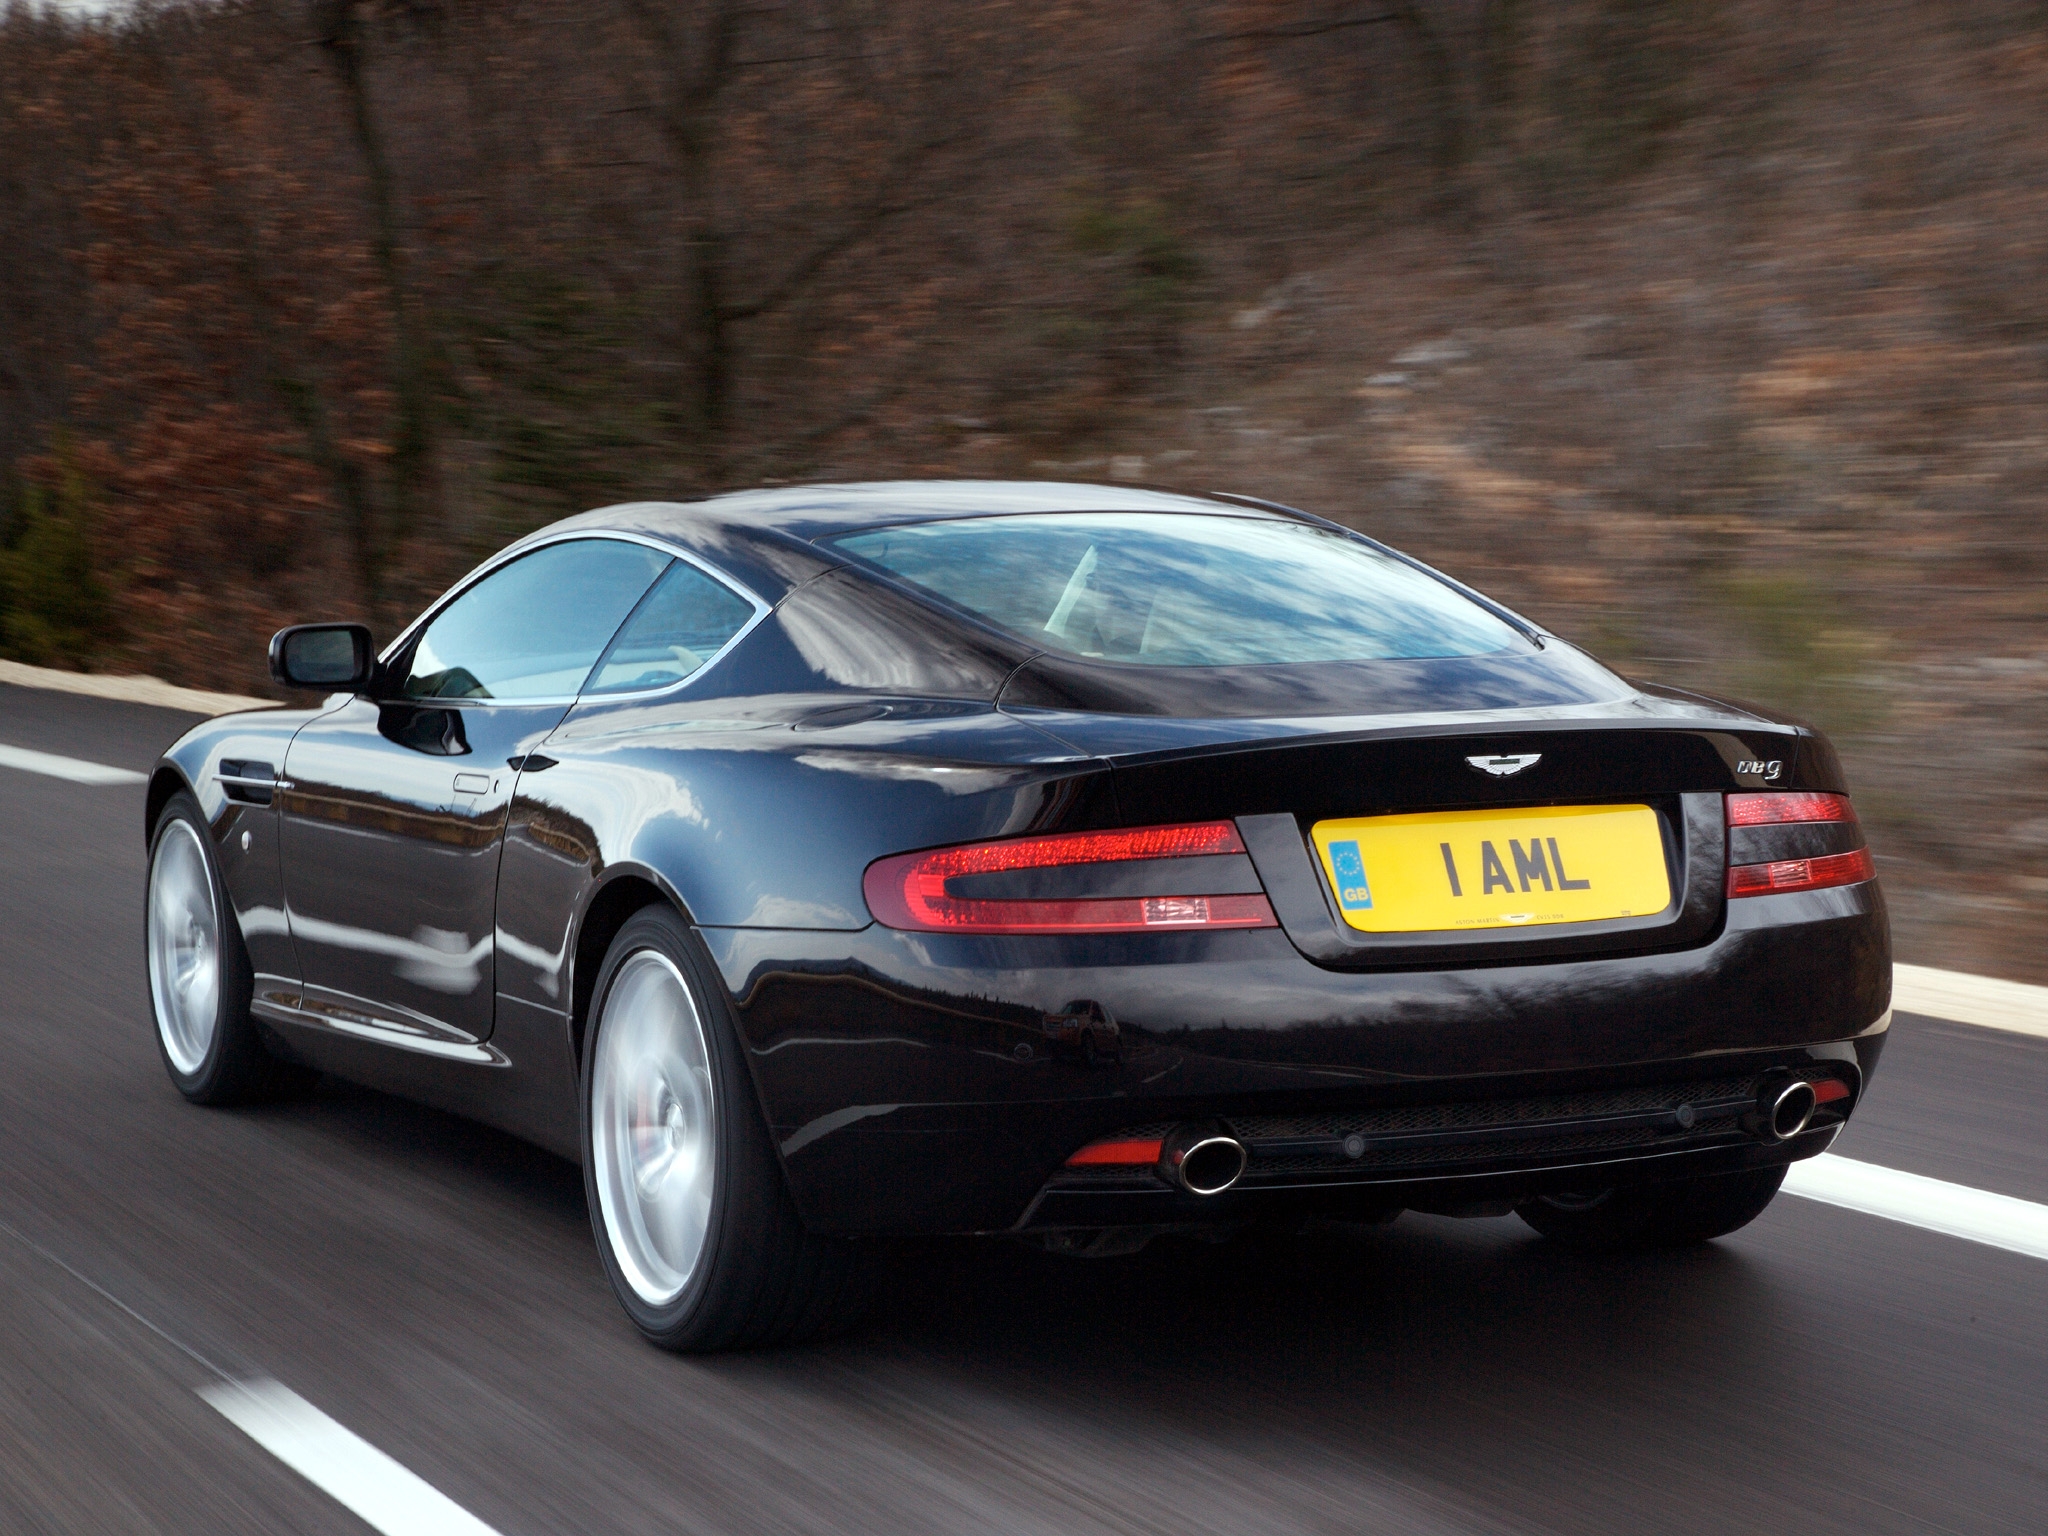 cars, auto, nature, trees, aston martin, black, back view, rear view, speed, style, db9, 2006